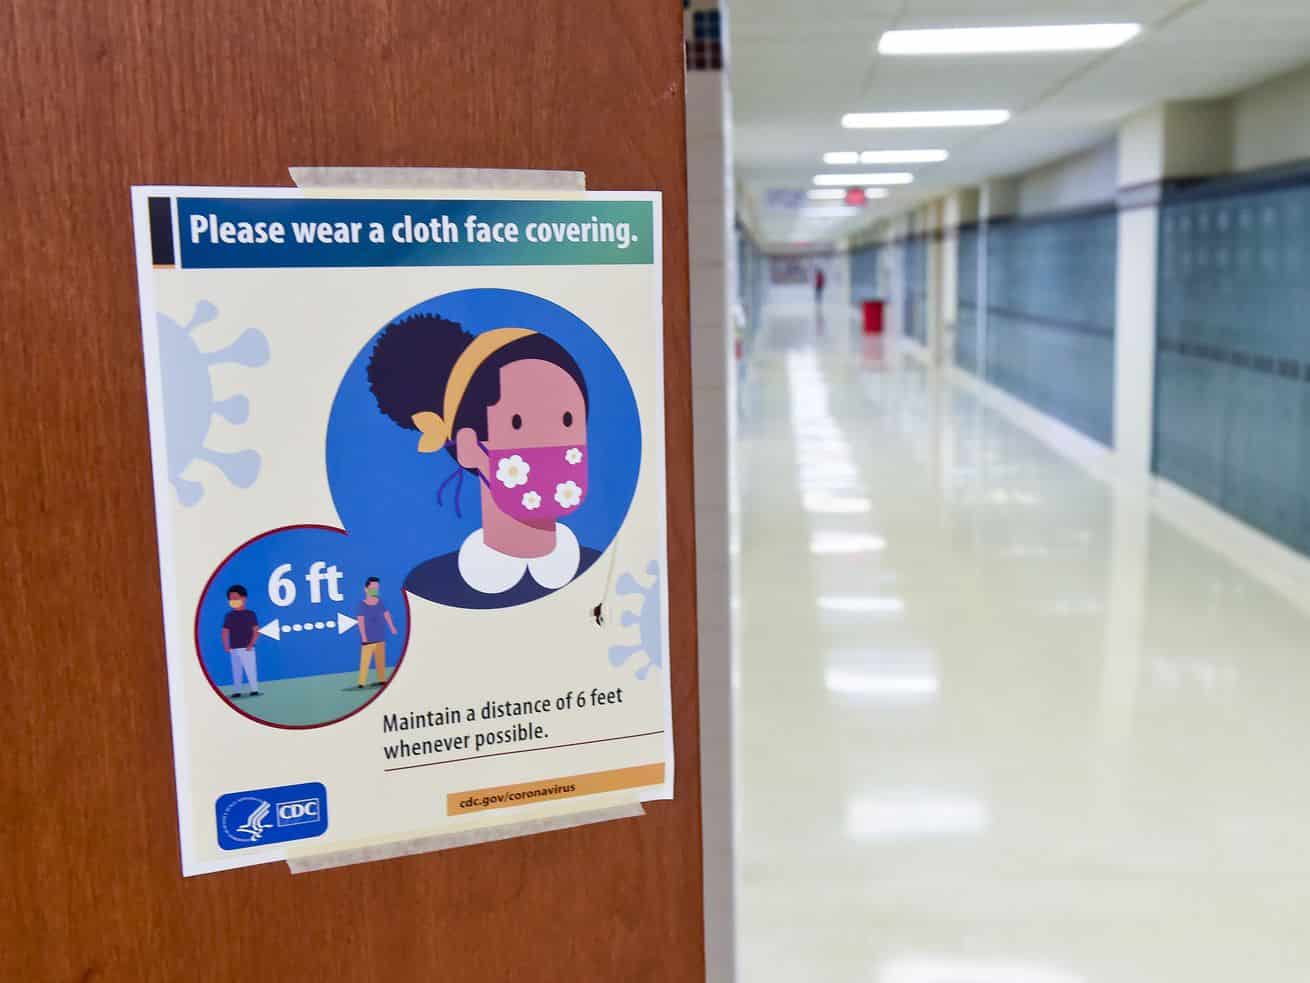 CDC says it’s safe to reopen schools — with proper precautions